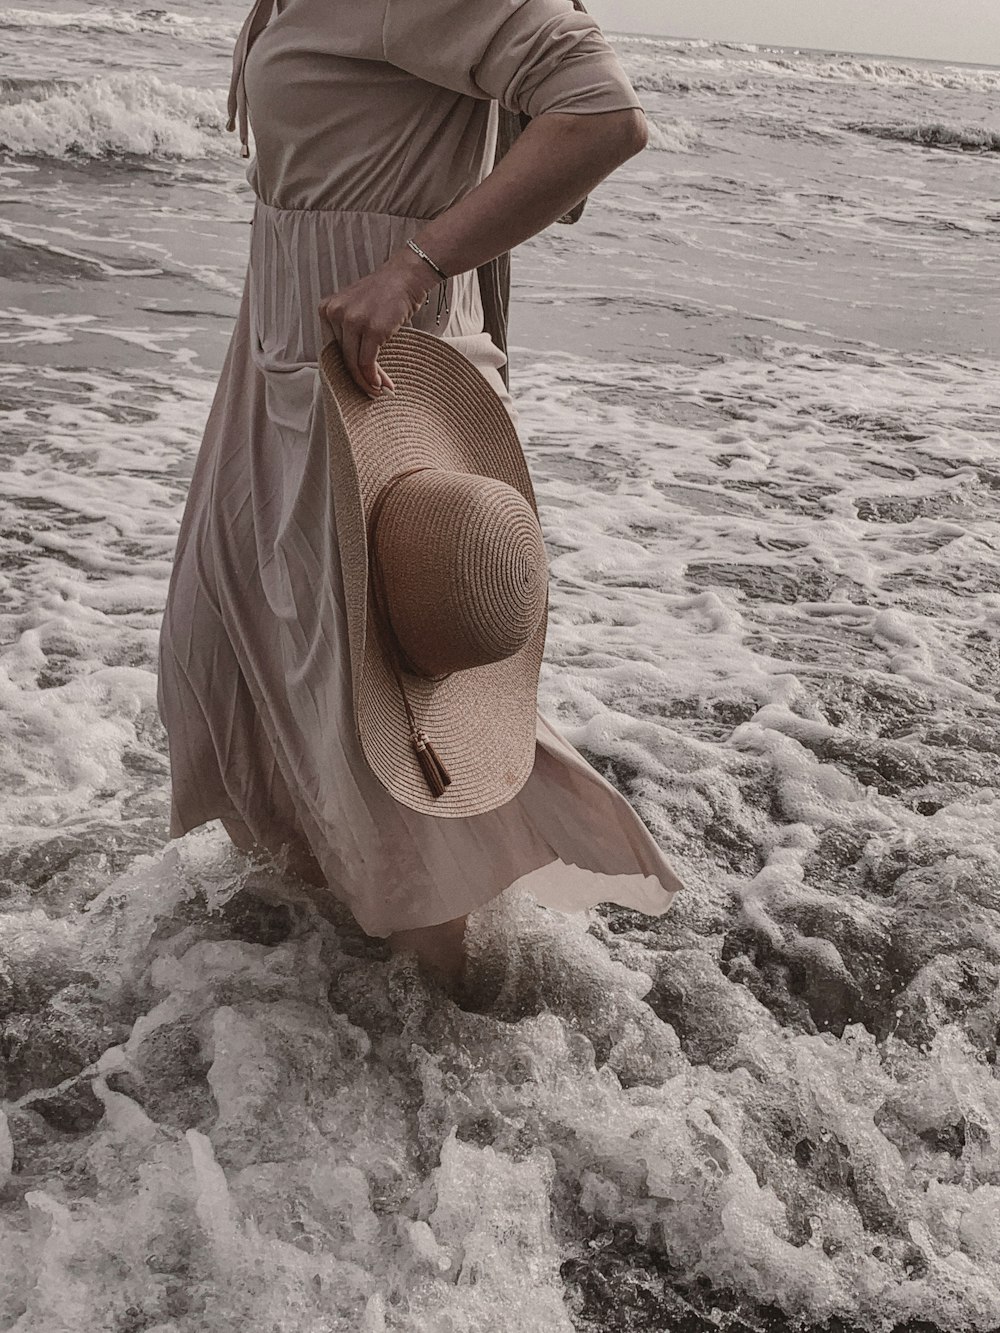 a woman standing in the ocean with a hat